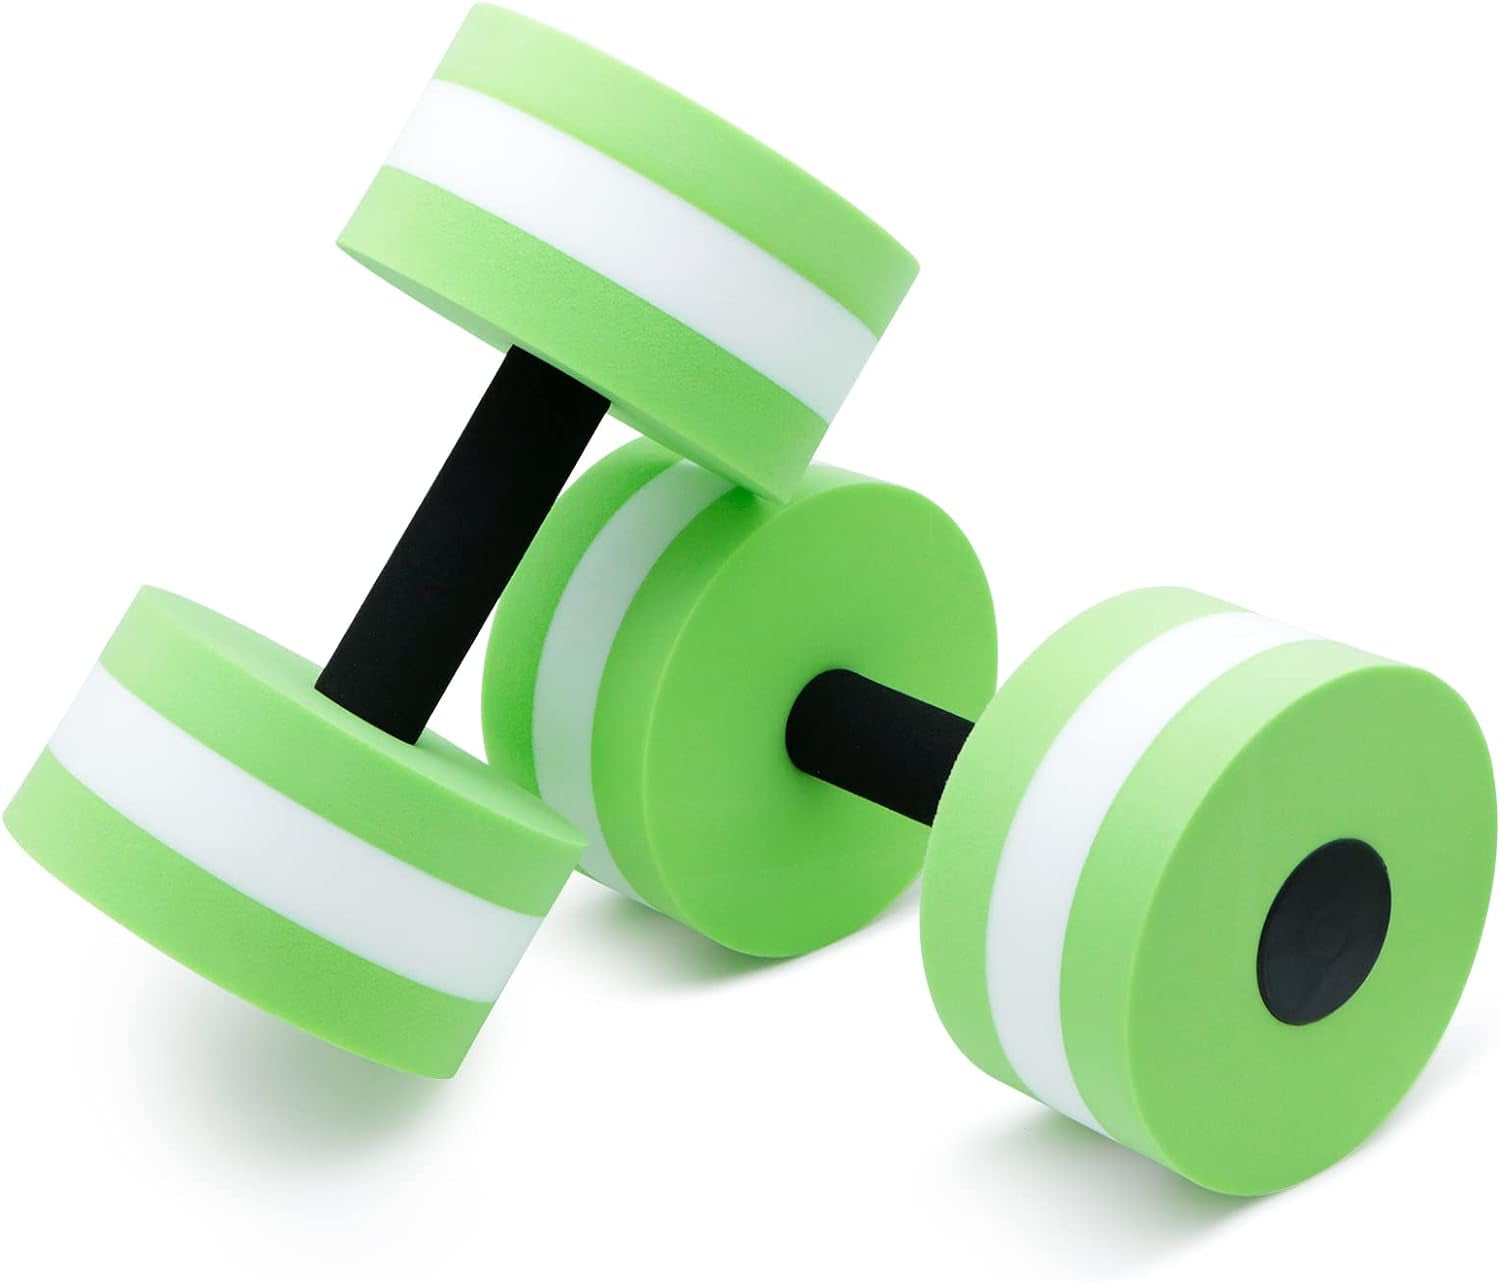 Aquatic Exercise Dumbbells - Set of 2 for Water Aerobics Fitness and Pool Exercises